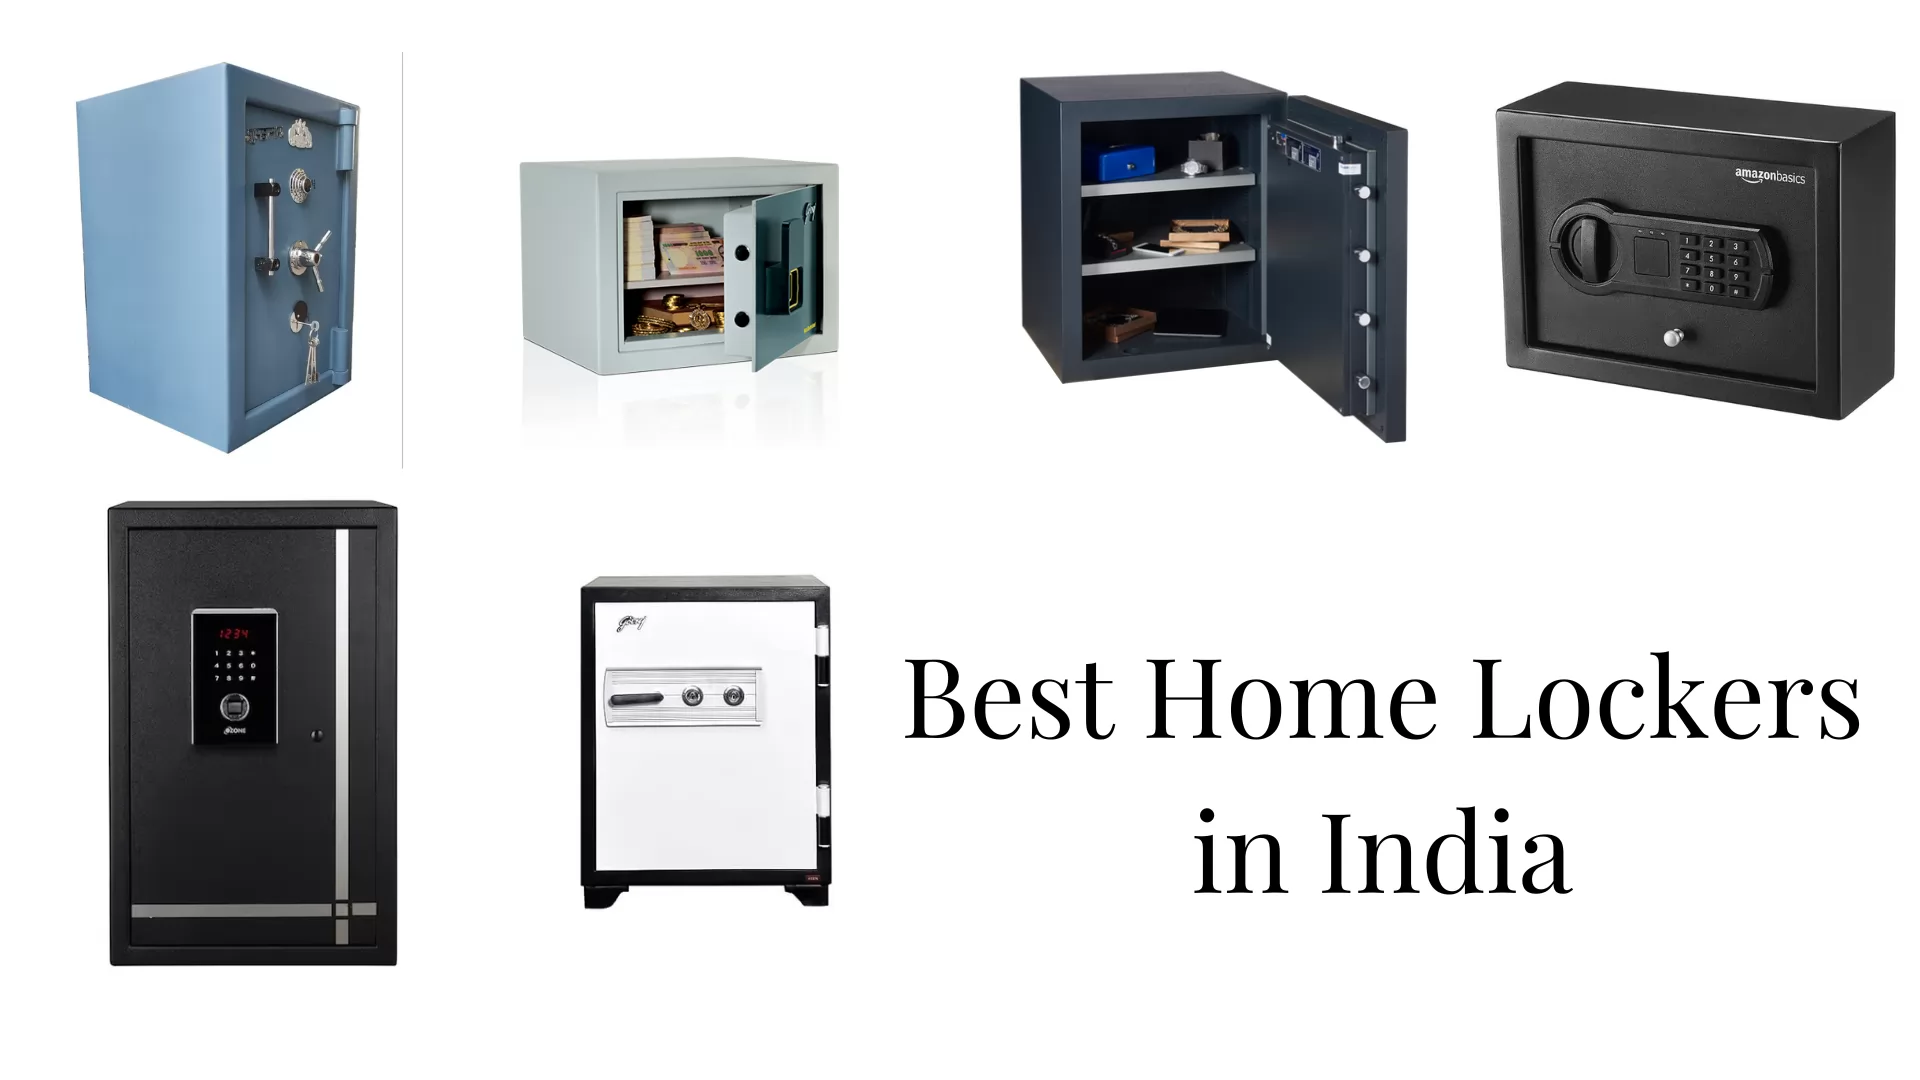 Best Home Lockers in India